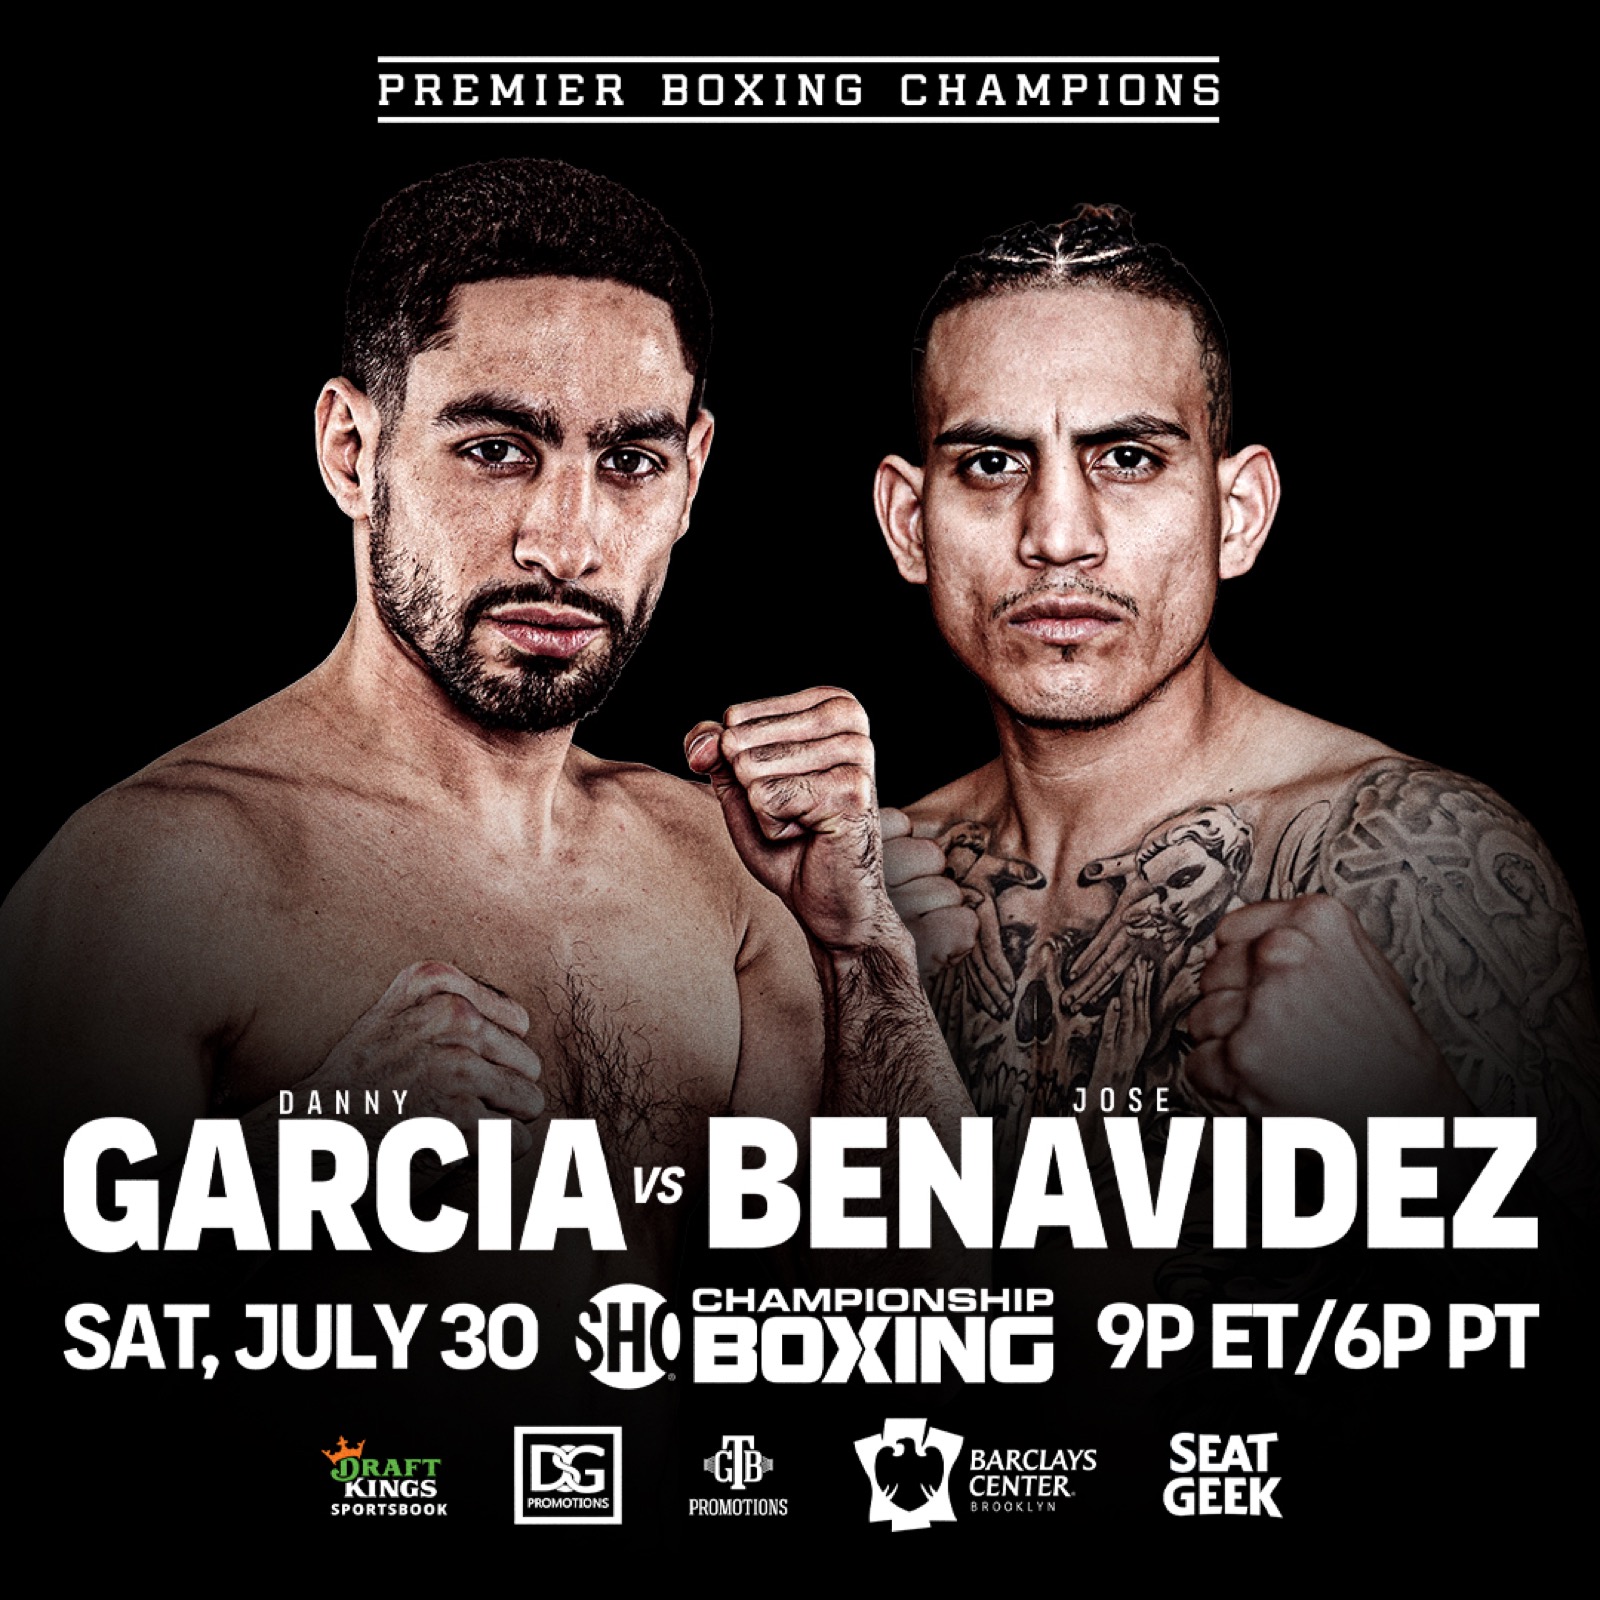 Image: Danny Garcia ready to tackle top dogs at 154